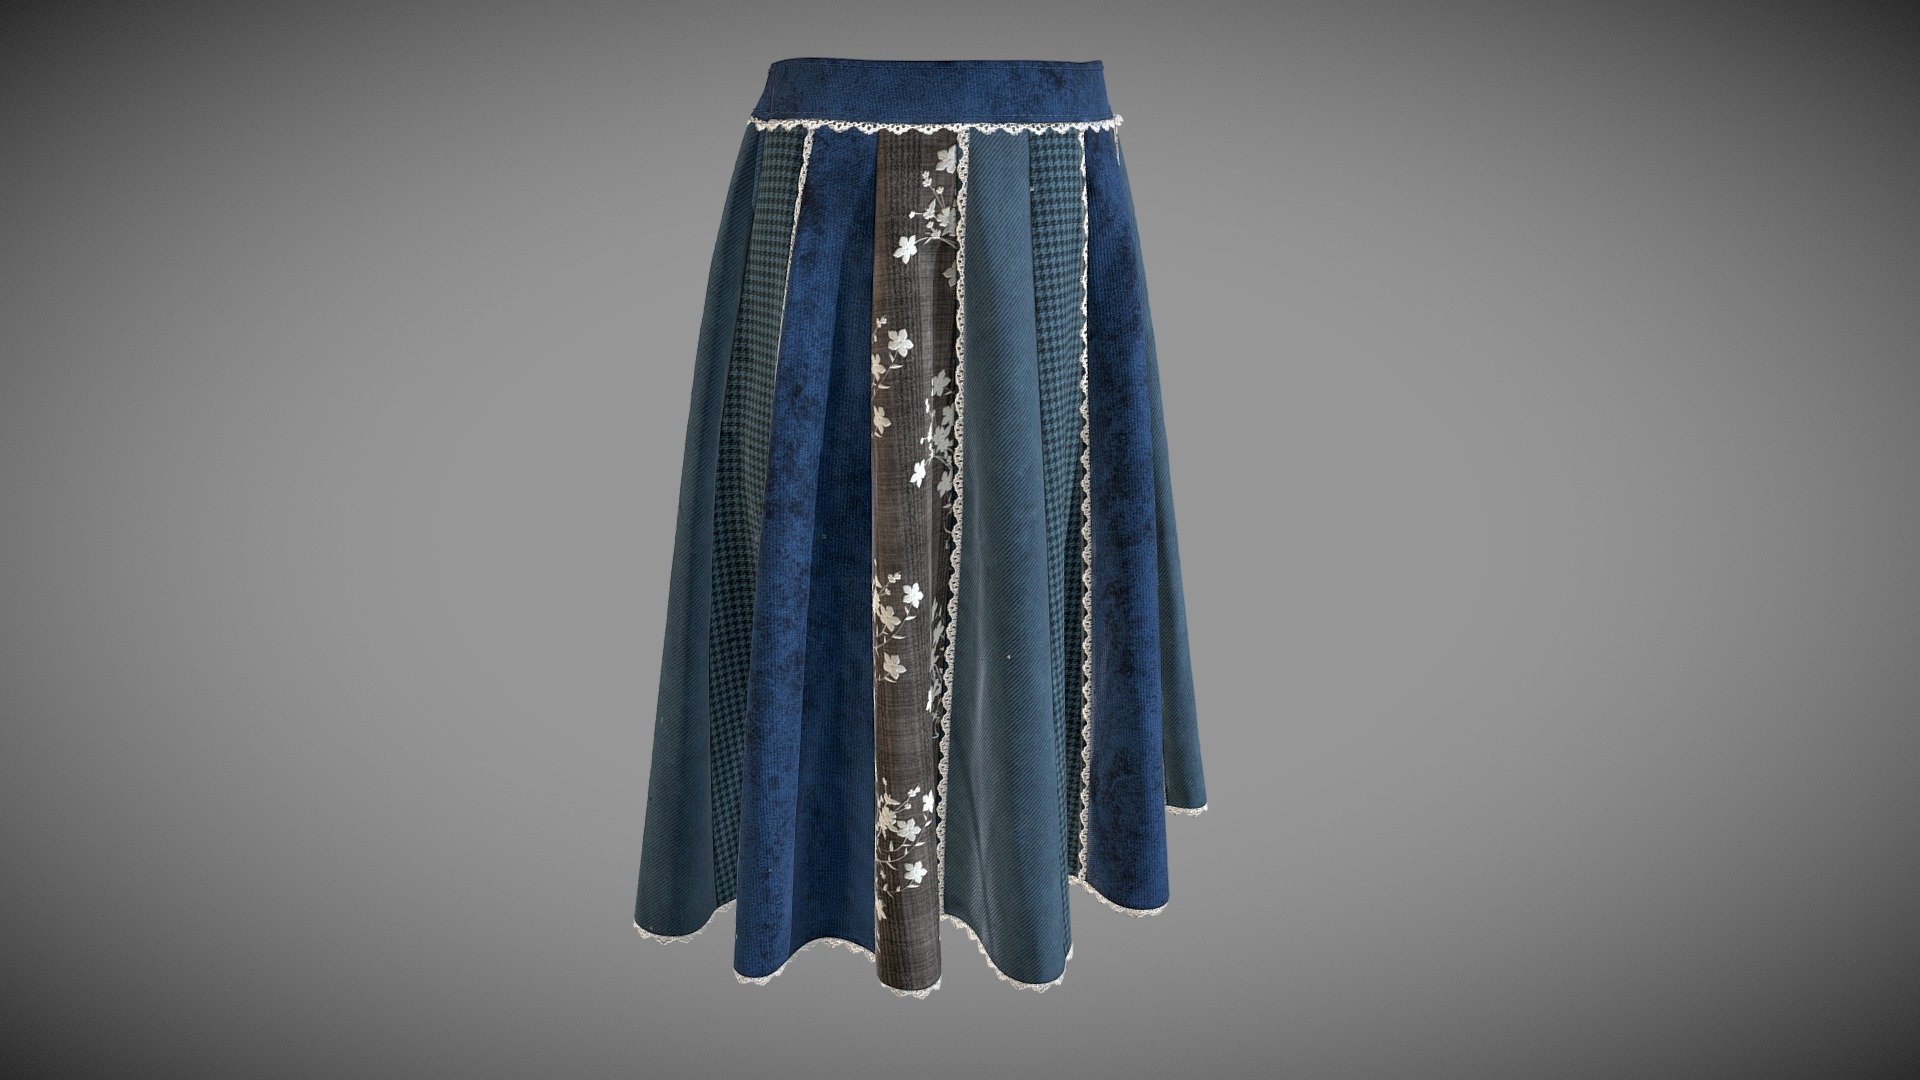 The 3D model presents a 3D reconstruction of a skirt (Design patent RU107503 “Skirt”). The casual 16-gored skirt has a belt and a zip fastener. The garment is made of four textile materials. A decorative lace ribbons run along the seamlines, the belt and the heamline. The 3D model was created in Clo3D software, textured in Substance Painter and post-processed in 3dsMax.

The authors of the 3D model are Mariia Moskvina and Aleksei Moskvin (Saint Petersburg State University of Industrial Technologies and Design)

https://independent.academia.edu/MariiaMoskvina

https://independent.academia.edu/AlekseiMoskvin

DOI:   http://dx.doi.org/10.13140/RG.2.2.29130.03521

Original source: https://www1.fips.ru/registers-doc-view/fips_servlet?DB=RUDE&amp;DocNumber=107503&amp;TypeFile=html - Skirt (Design patent RU107503) - 3D model by Mariia Moskvina (@mariia89) 3d model